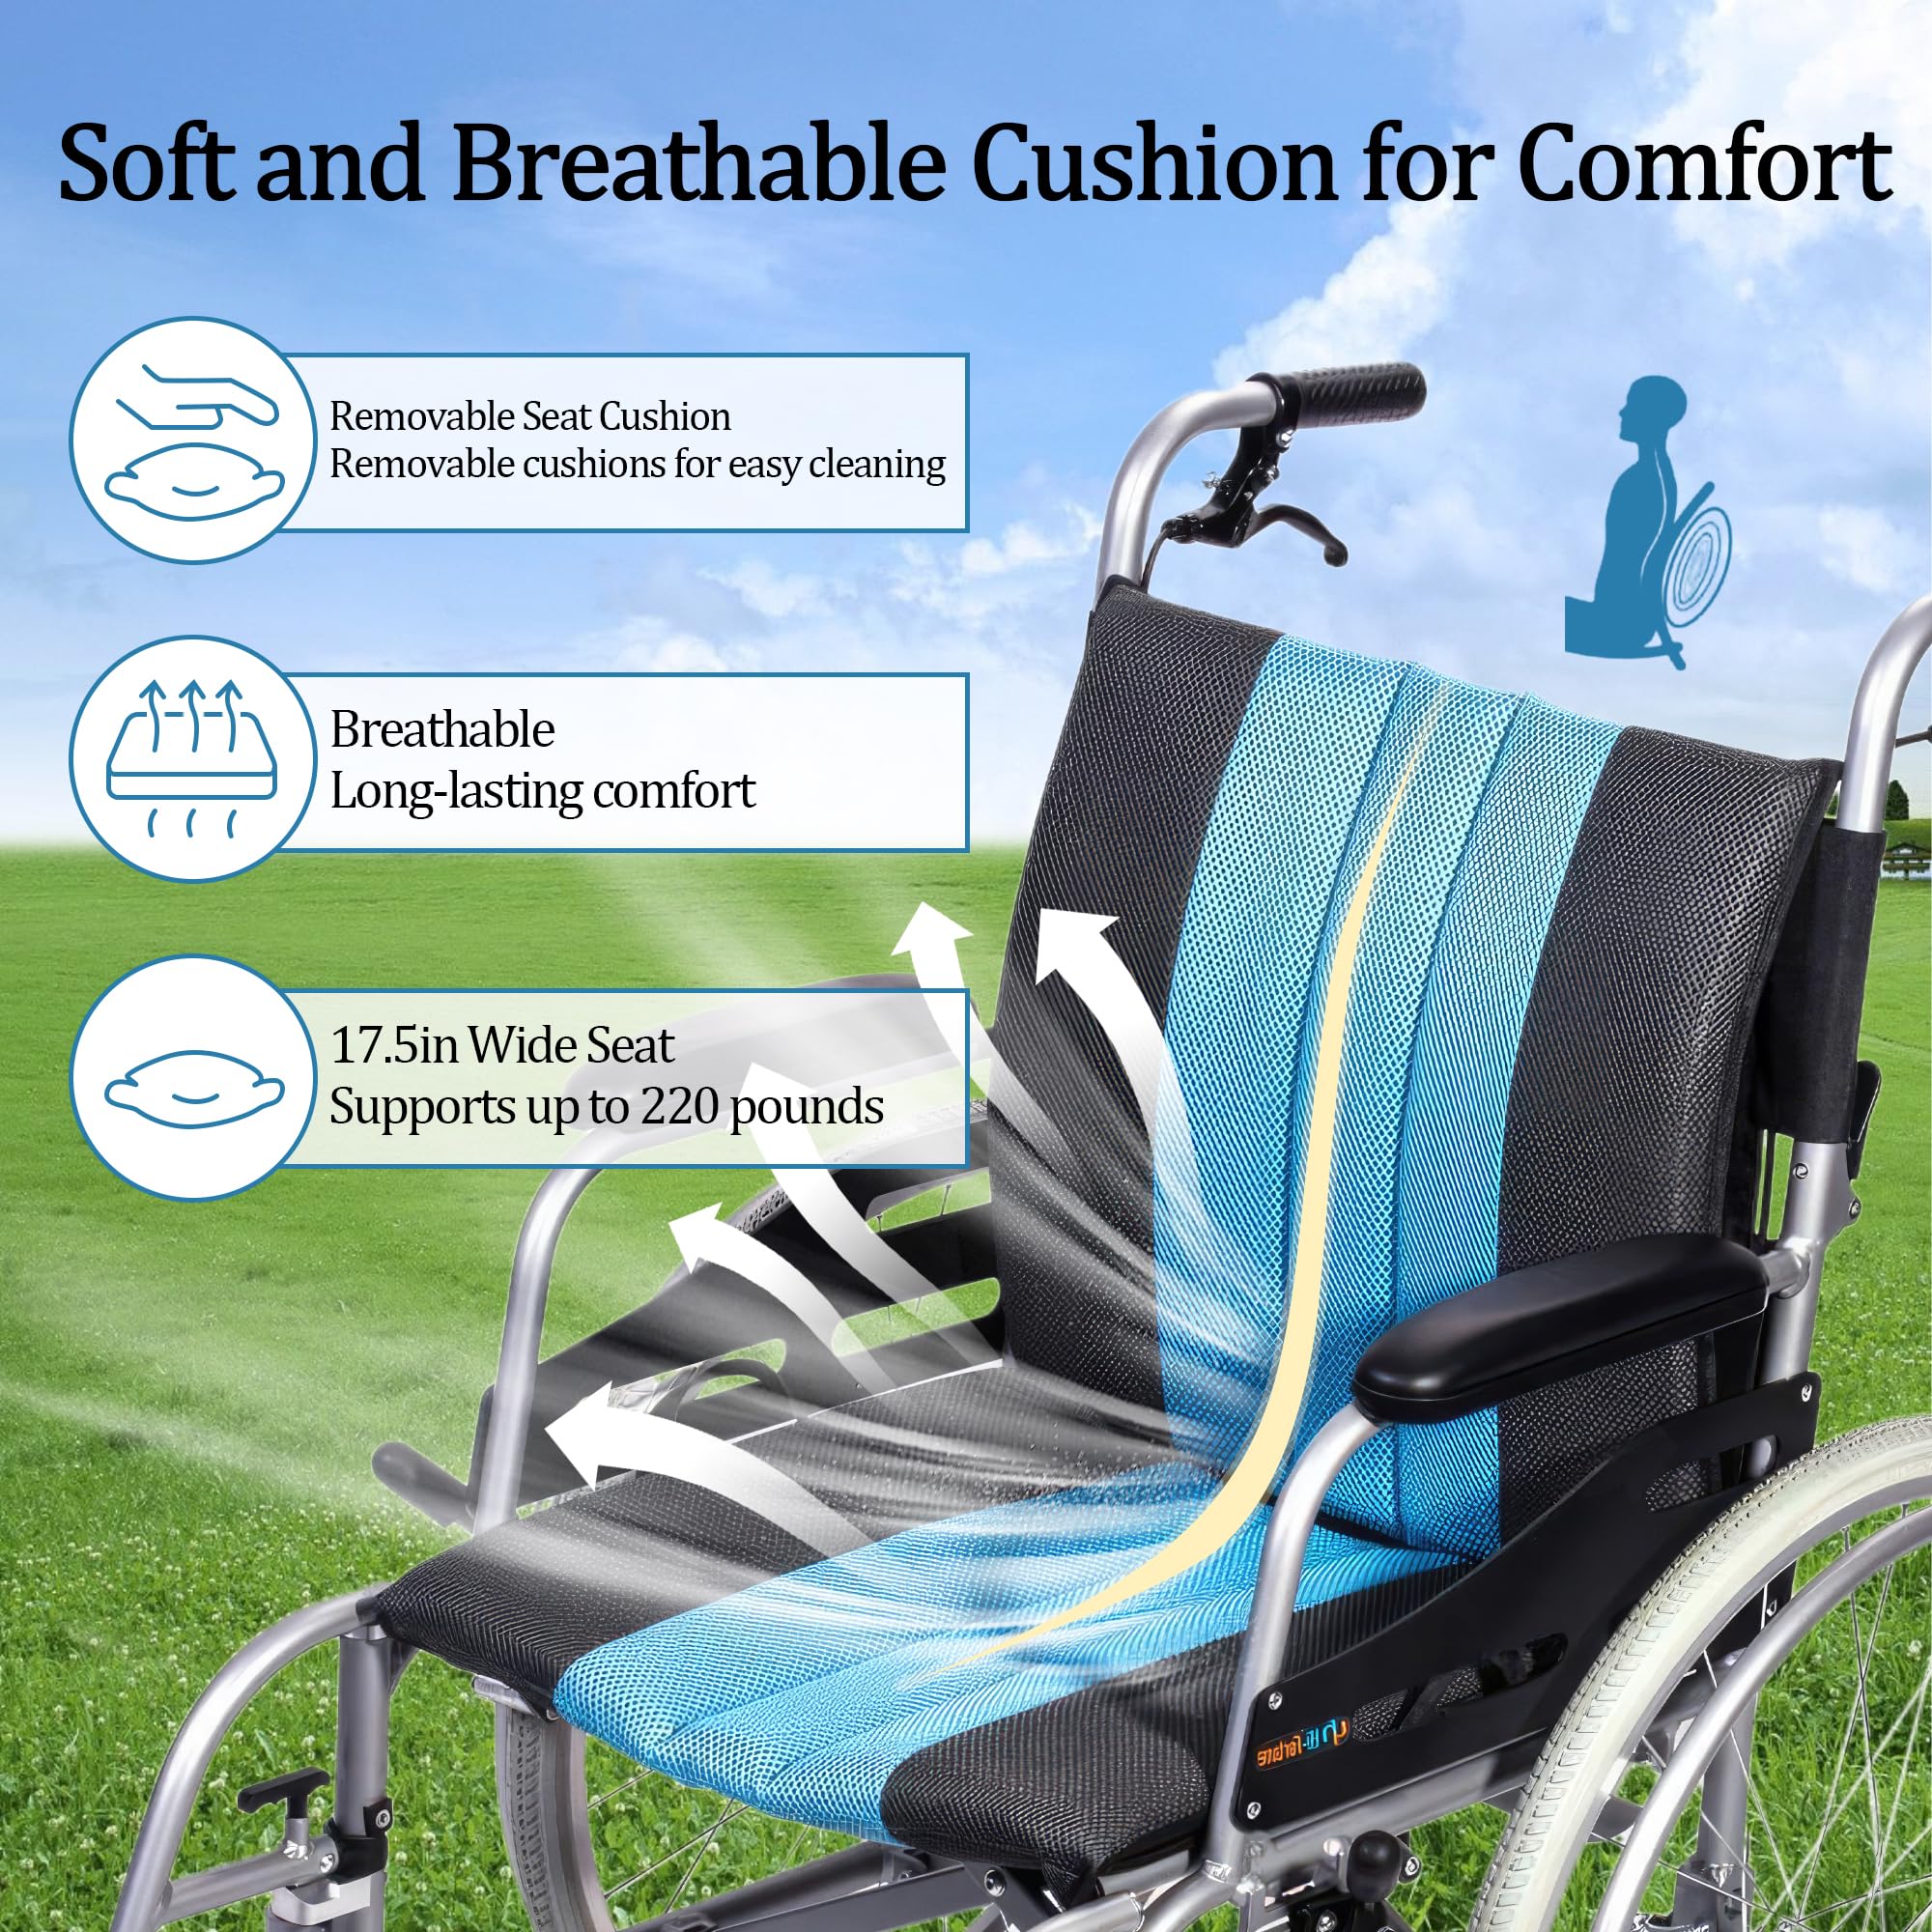 SUMELL Magnesium Lightweight Wheelchair - 21lbs Self Propelled Chair with Travel Bag and Cushion, Portable and Folding 17.5” W Seat, Park & Brake Anti Tipper, Swing Away Footrests, Ultra Light, Blue